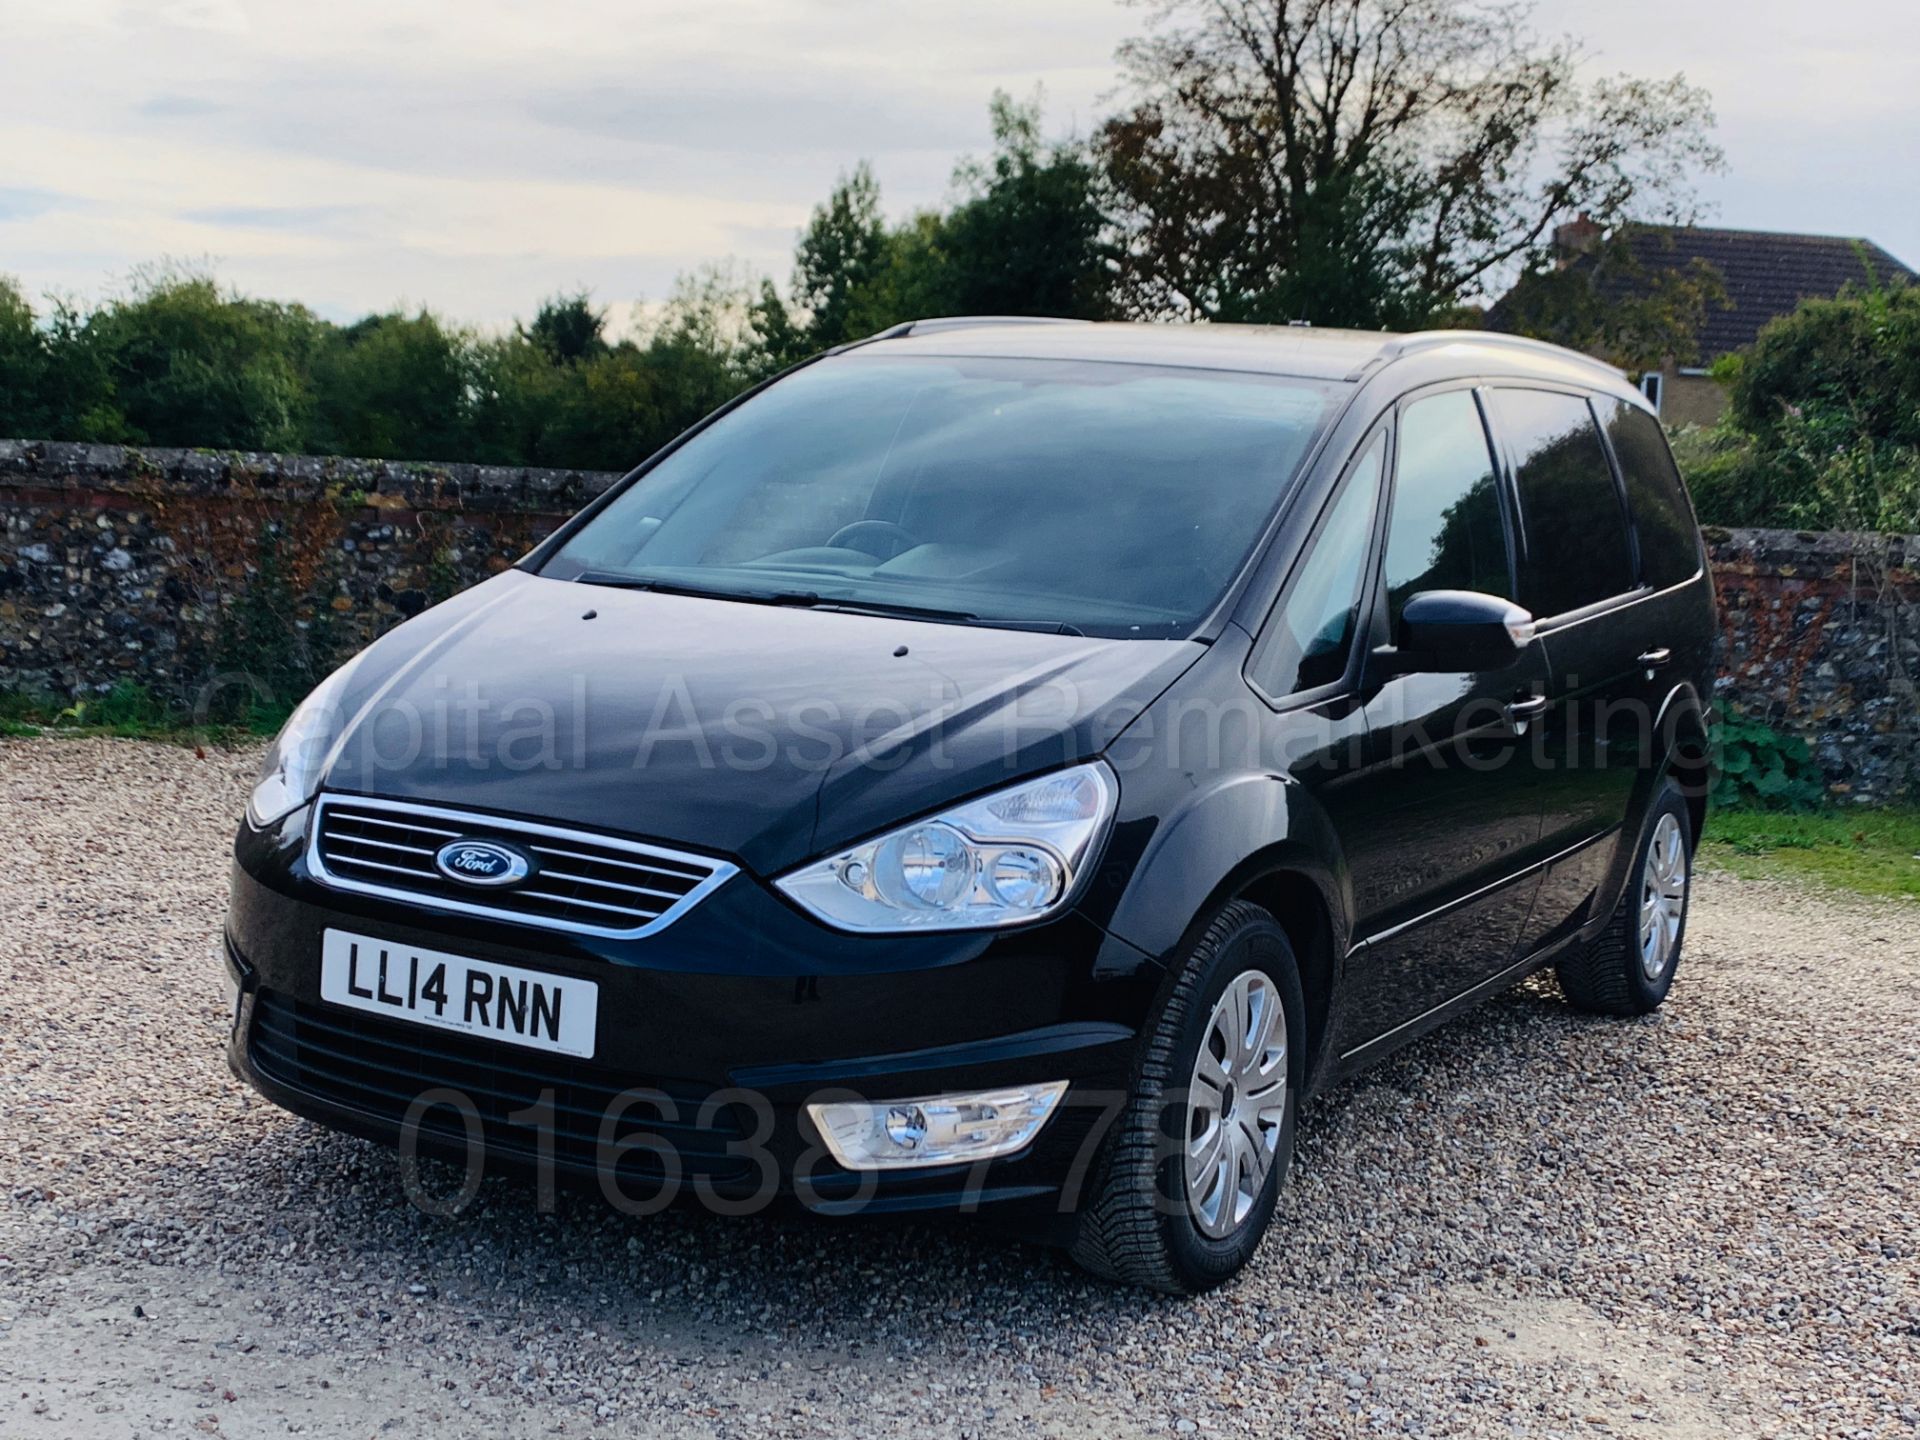 (ON SALE) FORD GALAXY **ZETEC** 7 SEATER MPV (2014) 2.0 TDCI - 140 BHP - AUTO POWER SHIFT (1 OWNER) - Image 4 of 36